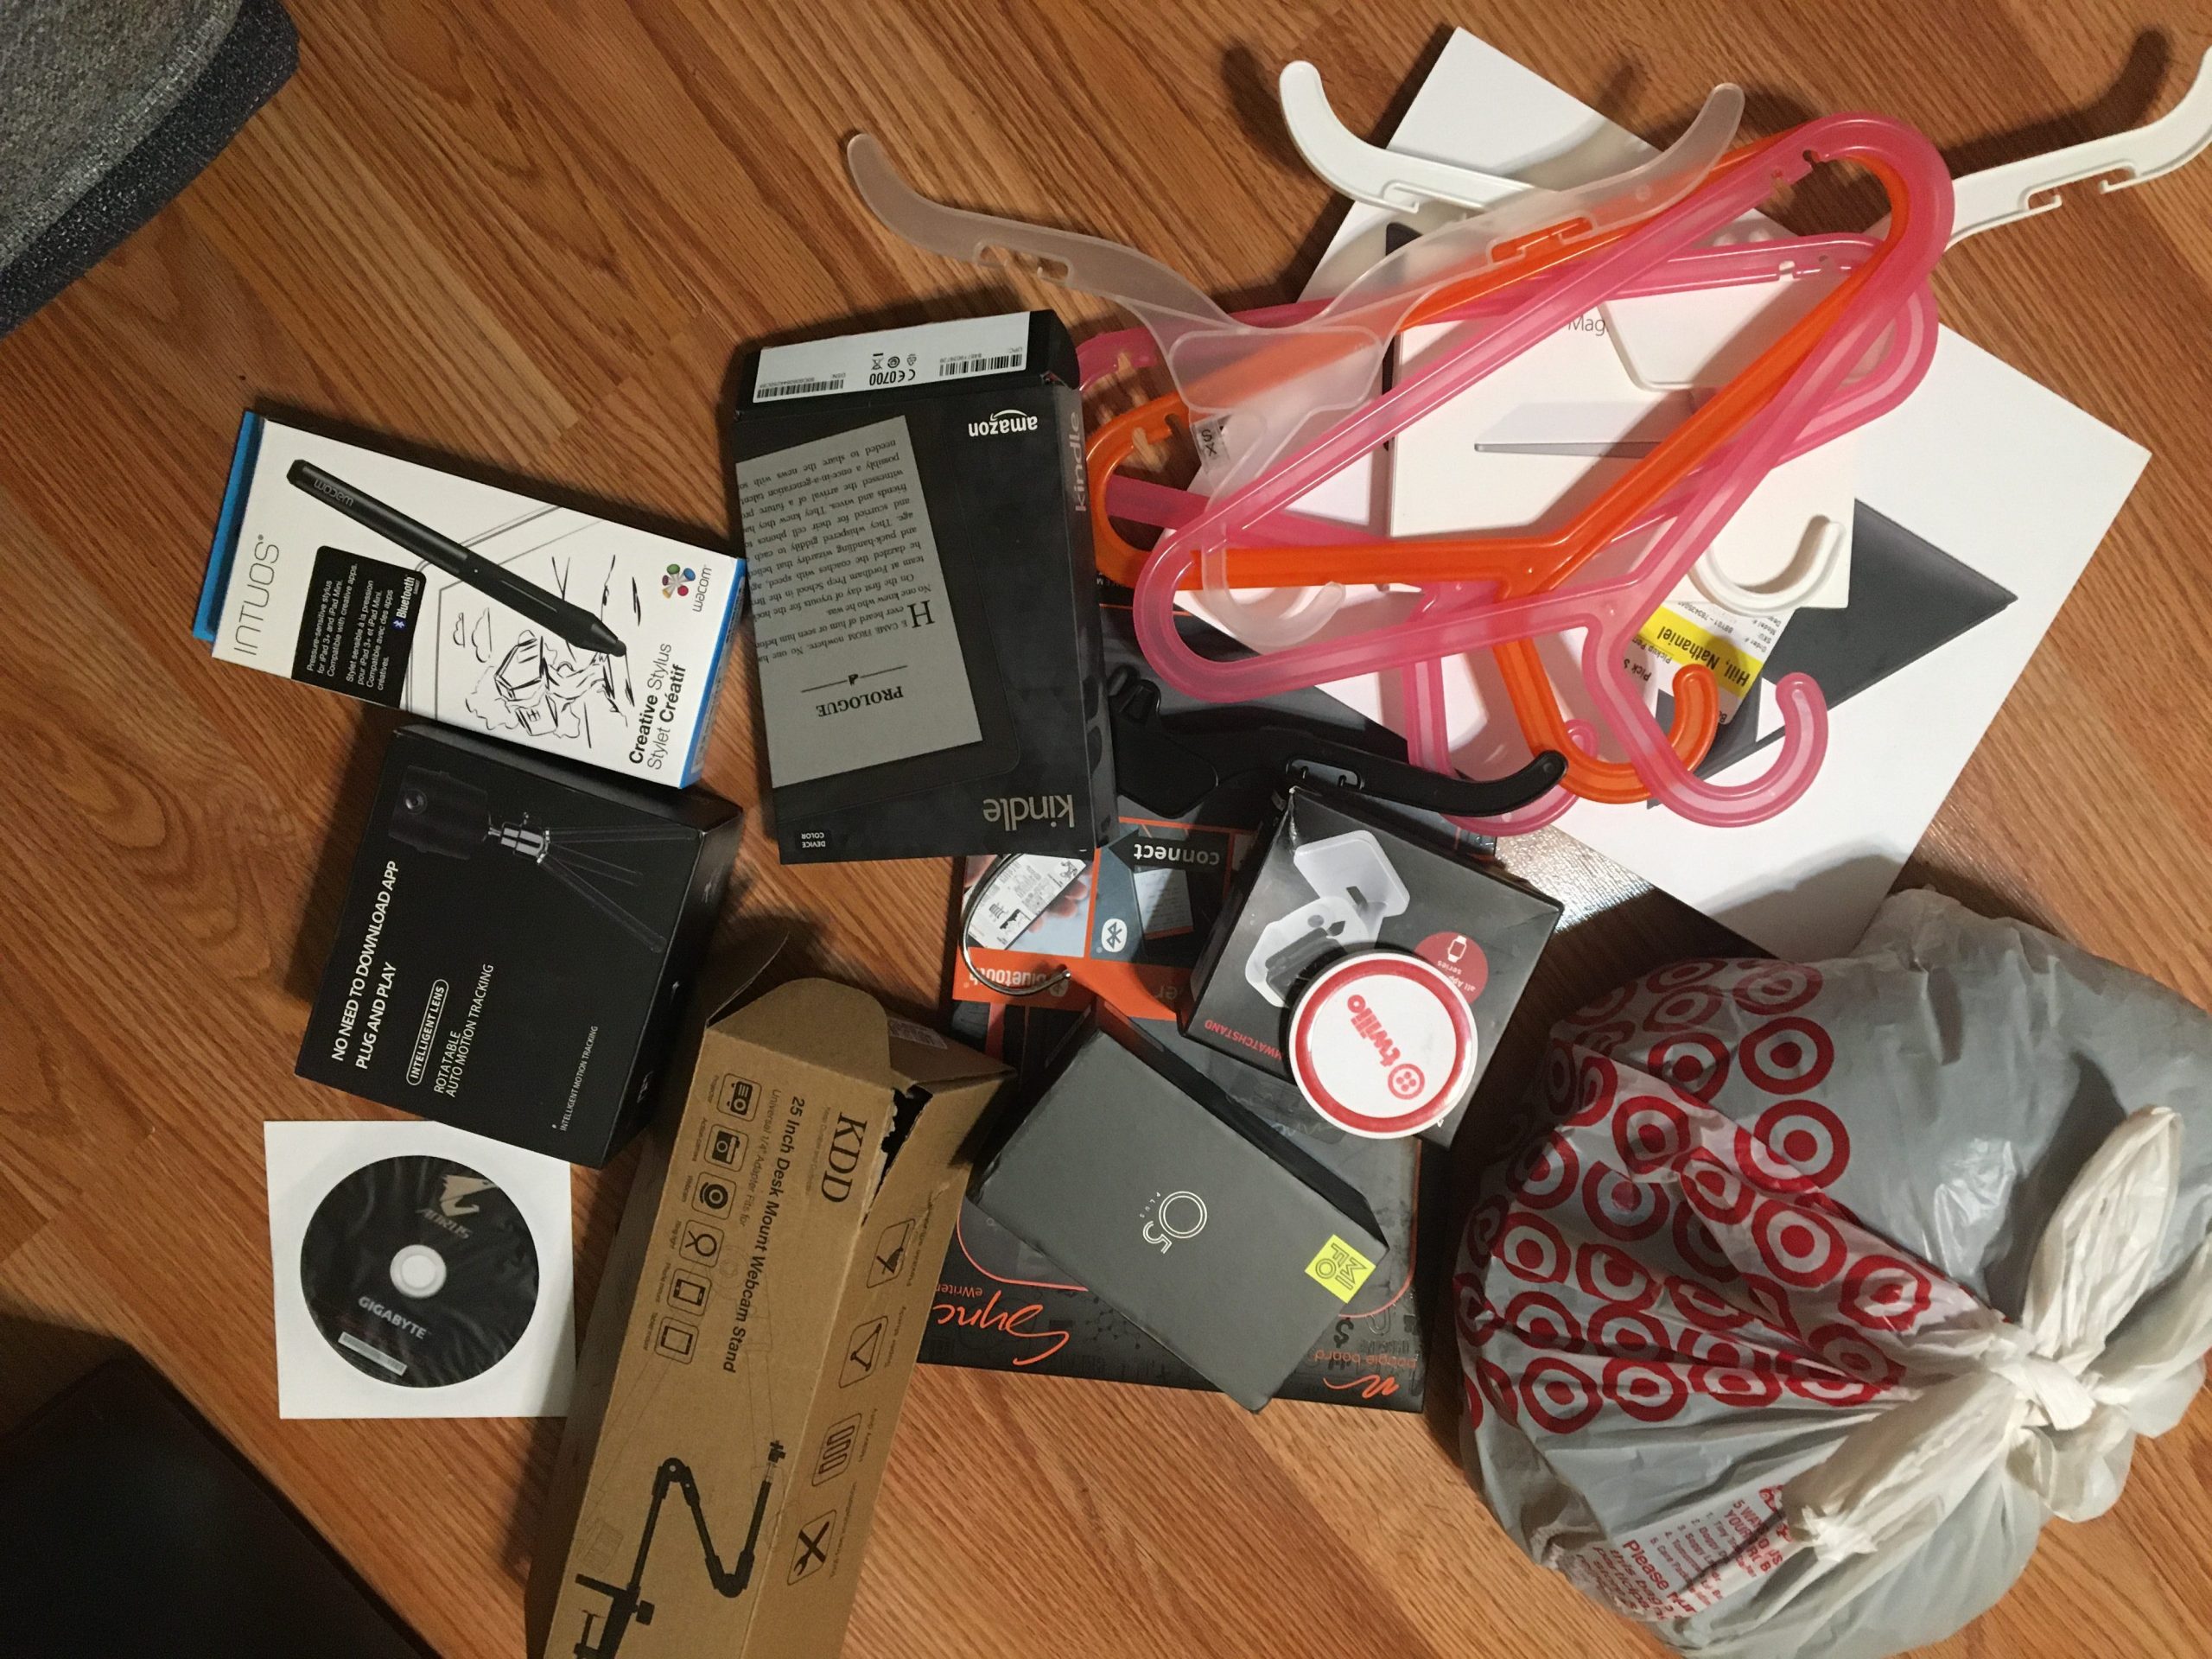 Boxes, hangers, hair clip-ins (in the plastic bag), a wireless charging base, a driver disk. 